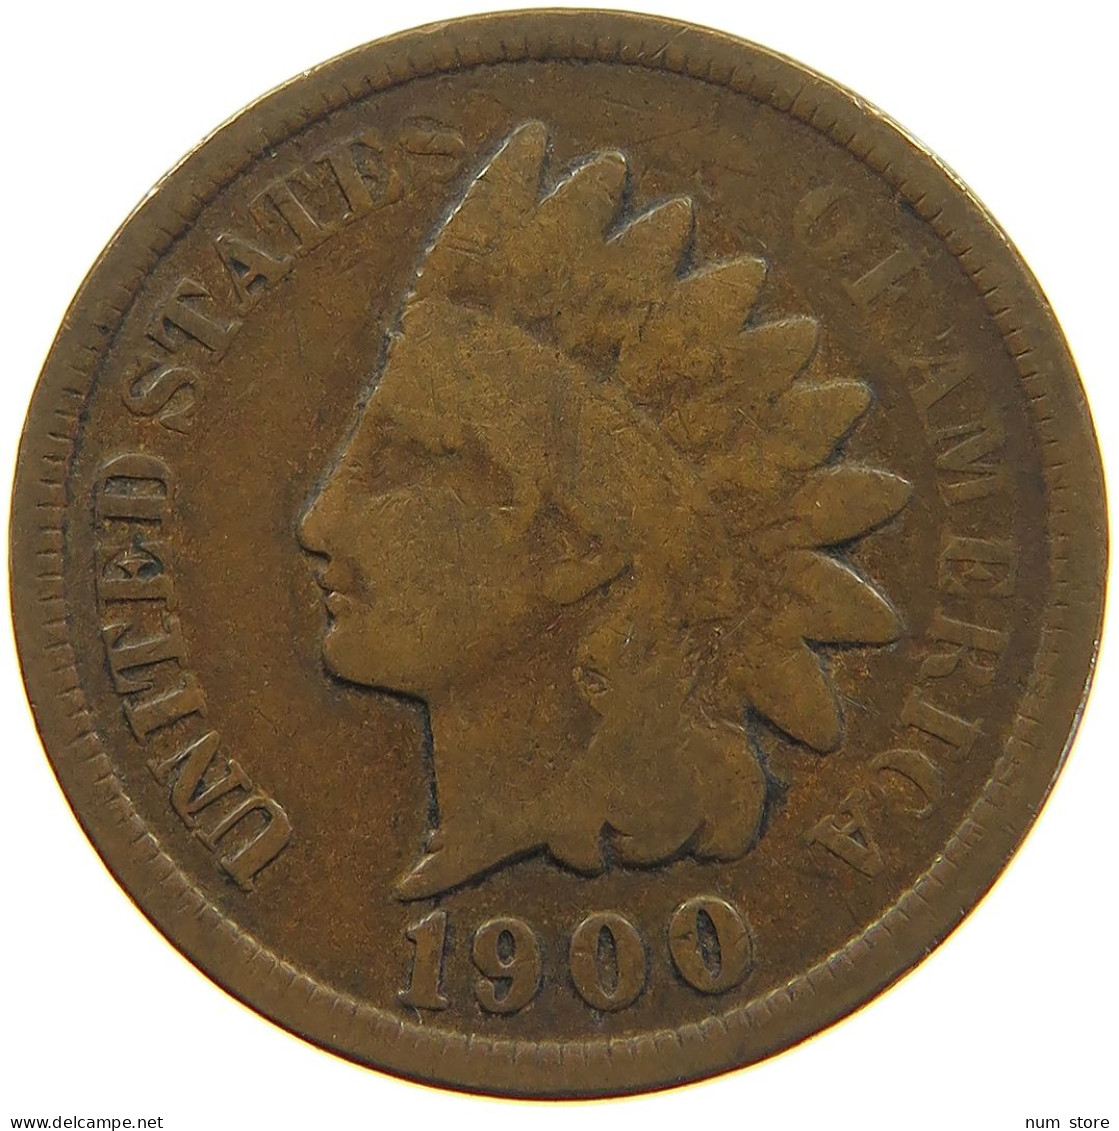 UNITED STATES OF AMERICA CENT 1900 INDIAN HEAD #c017 0345 - 1859-1909: Indian Head